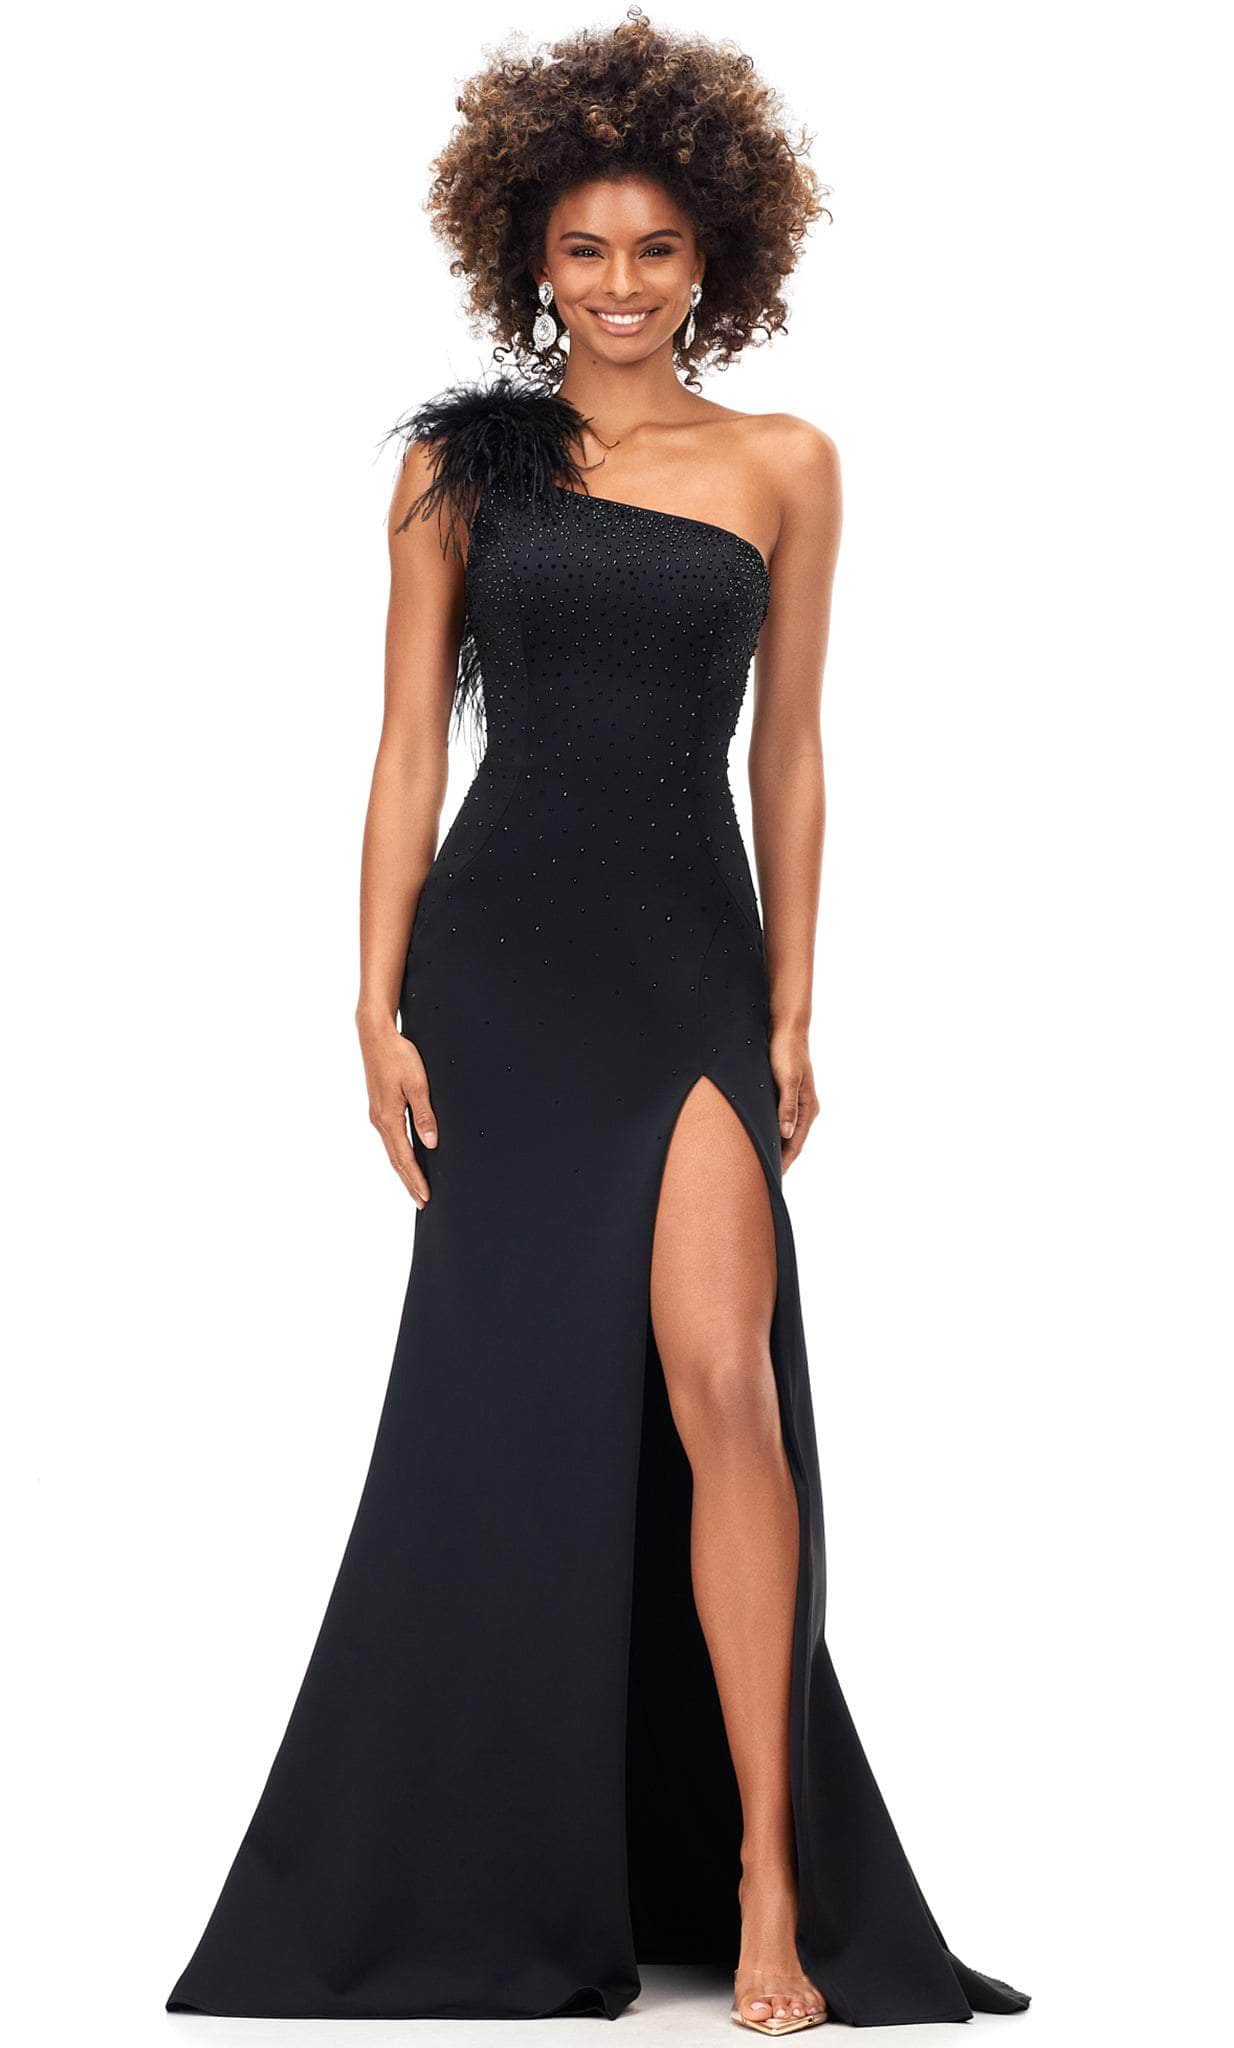 Image of Ashley Lauren 11290 - Feathered Strap Evening Gown